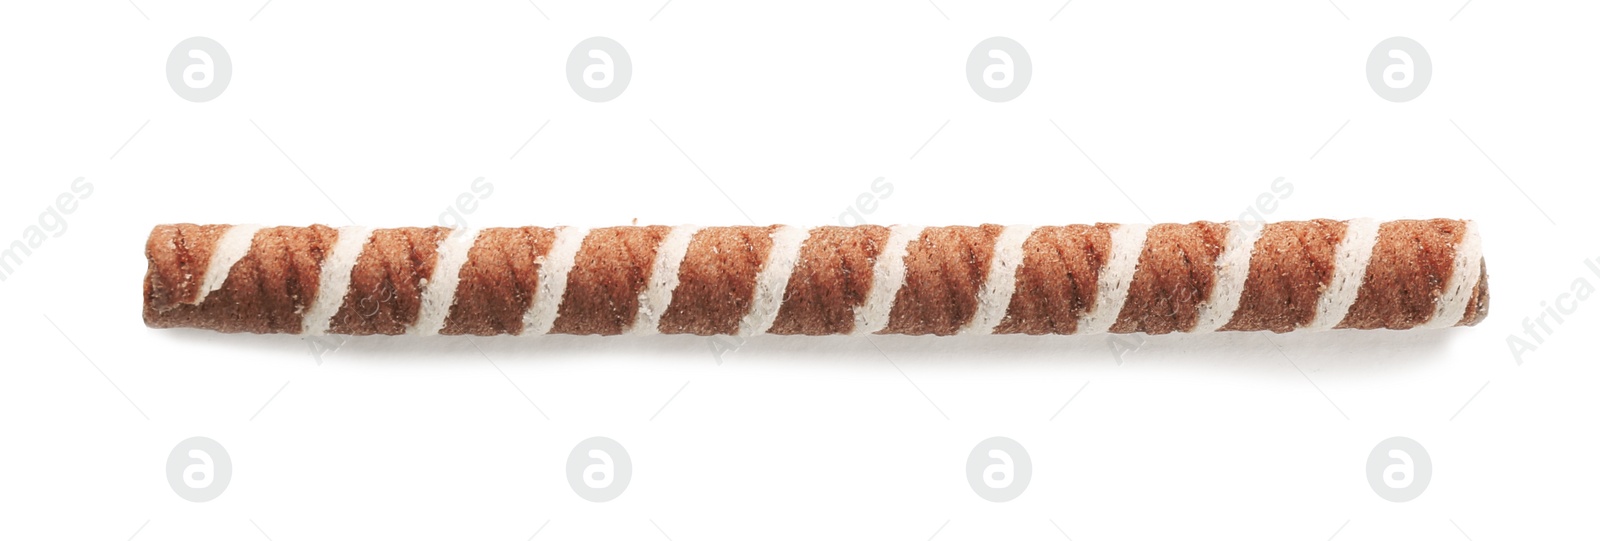 Photo of Tasty wafer roll stick on white background, top view. Crispy food